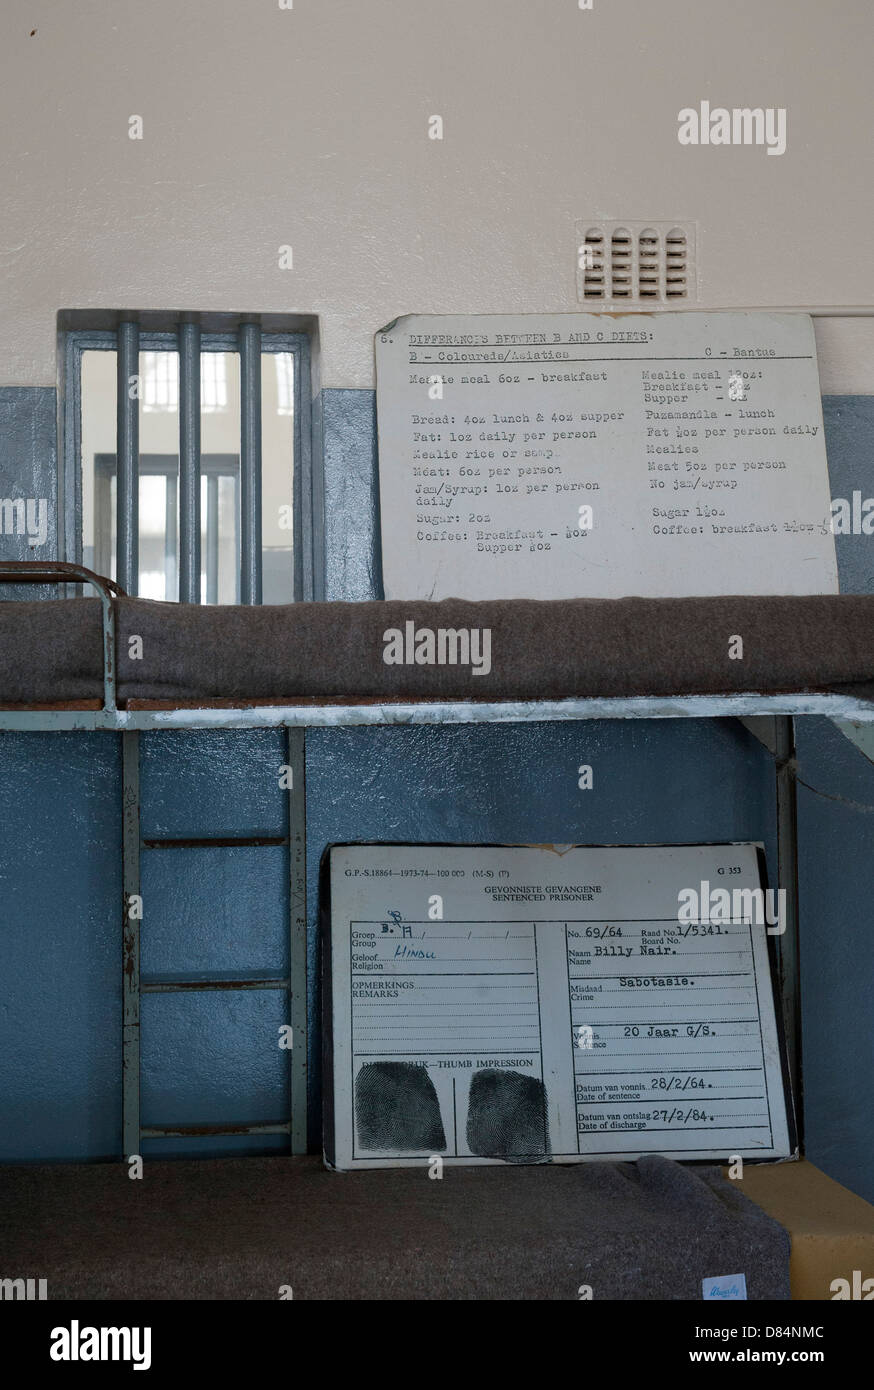 Inside Robben Island Prison, Cape Town, South Africa. The signs show the different meal allowances for prisoners. Stock Photo